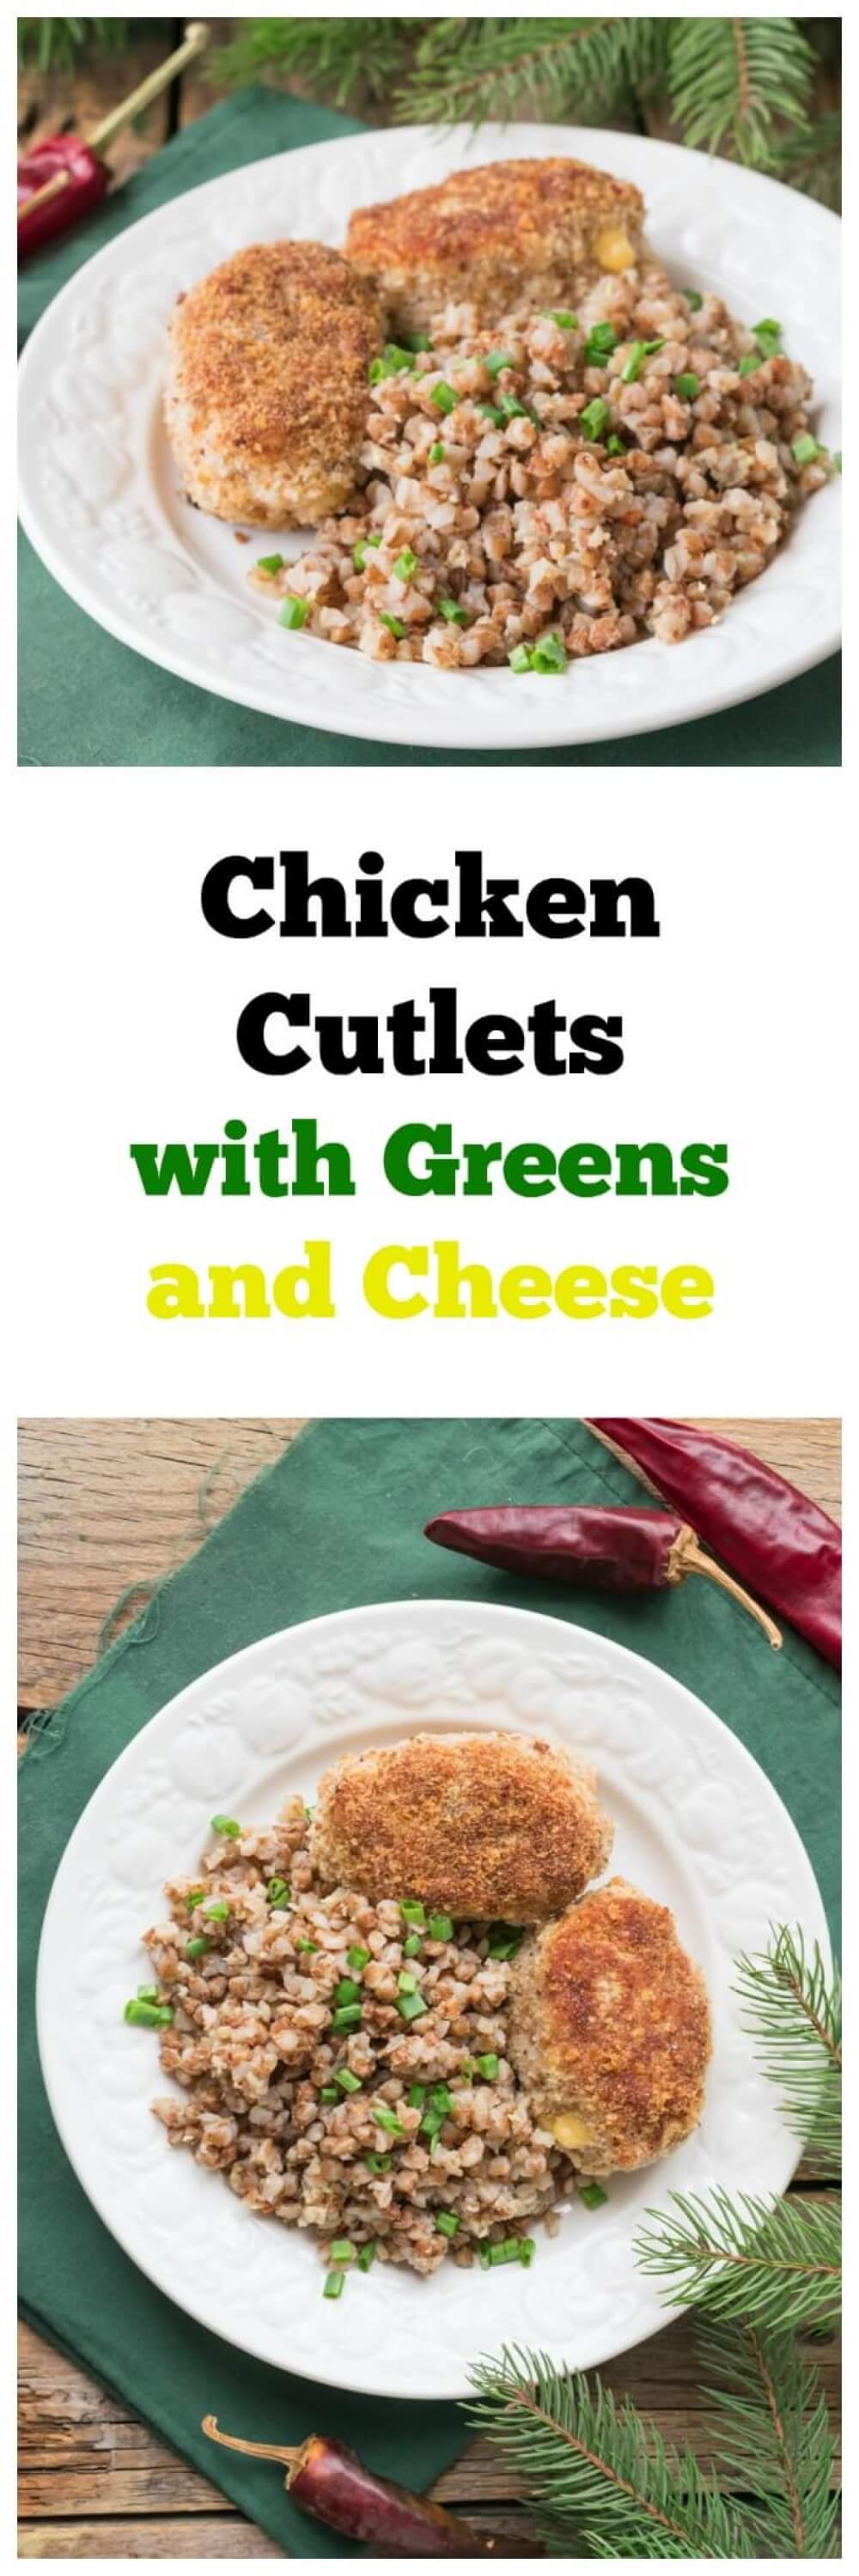 Chicken Cutlets with Greens and Cheese